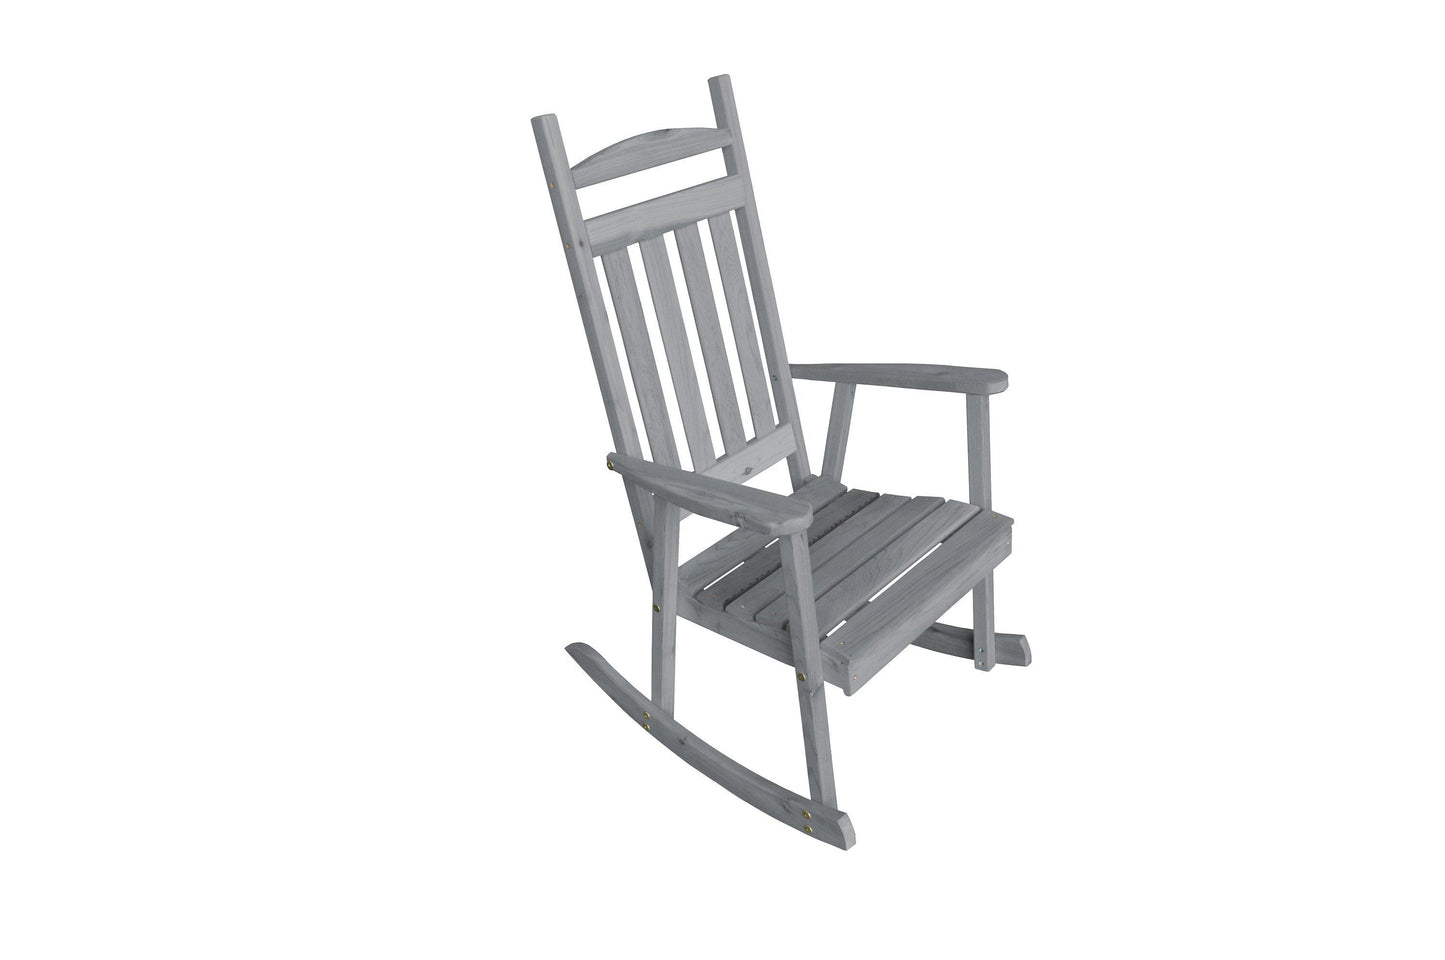 A&L FURNITURE CO. Western Red Cedar Classic Porch Rocking Chair - LEAD TIME TO SHIP 4 WEEKS OR LESS